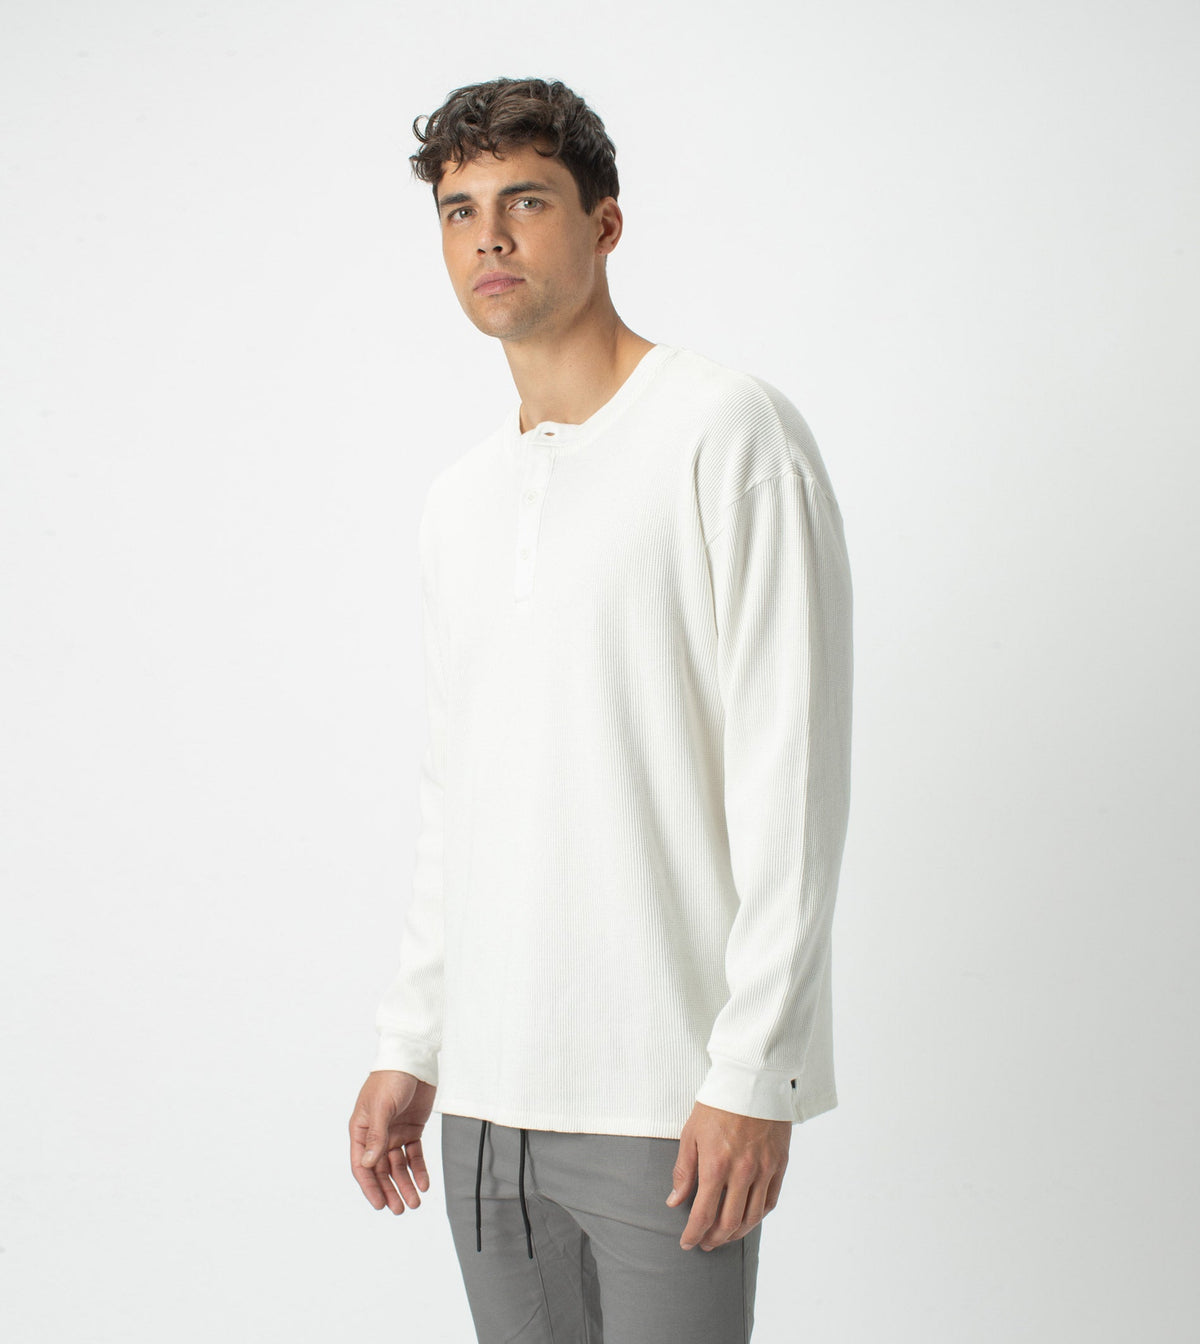 Discounts on Waffle Henley LS Tee Milk ZANEROBE are now available now